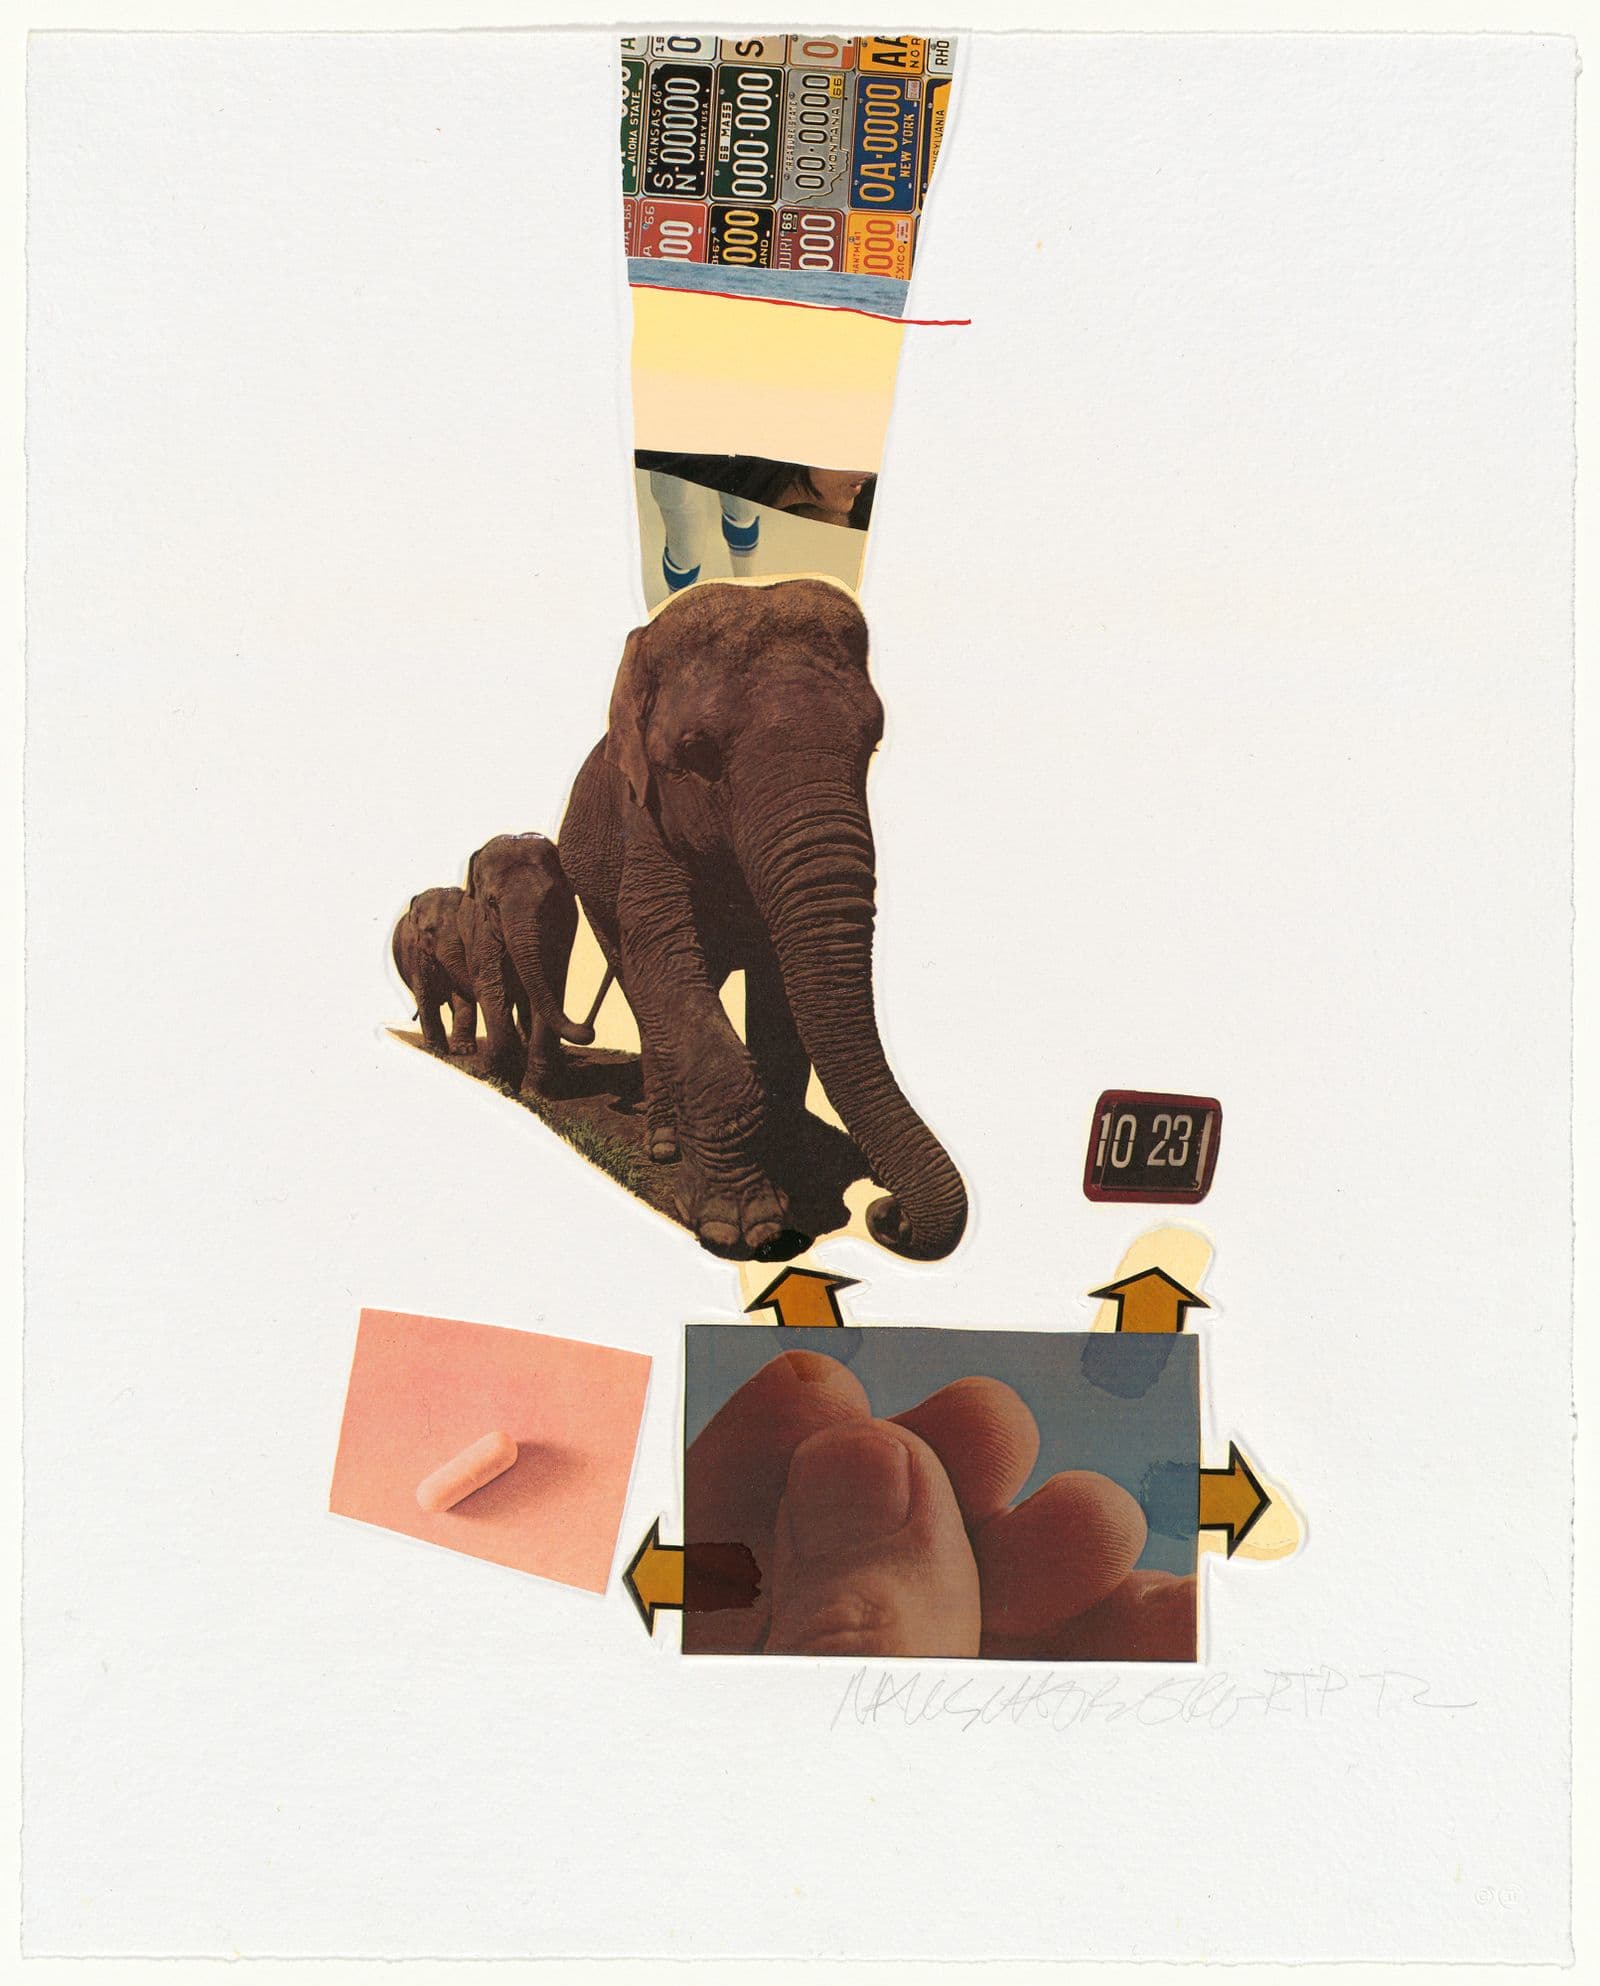 Collage with two elephants in the centre, small clock face, pill and fingertip images